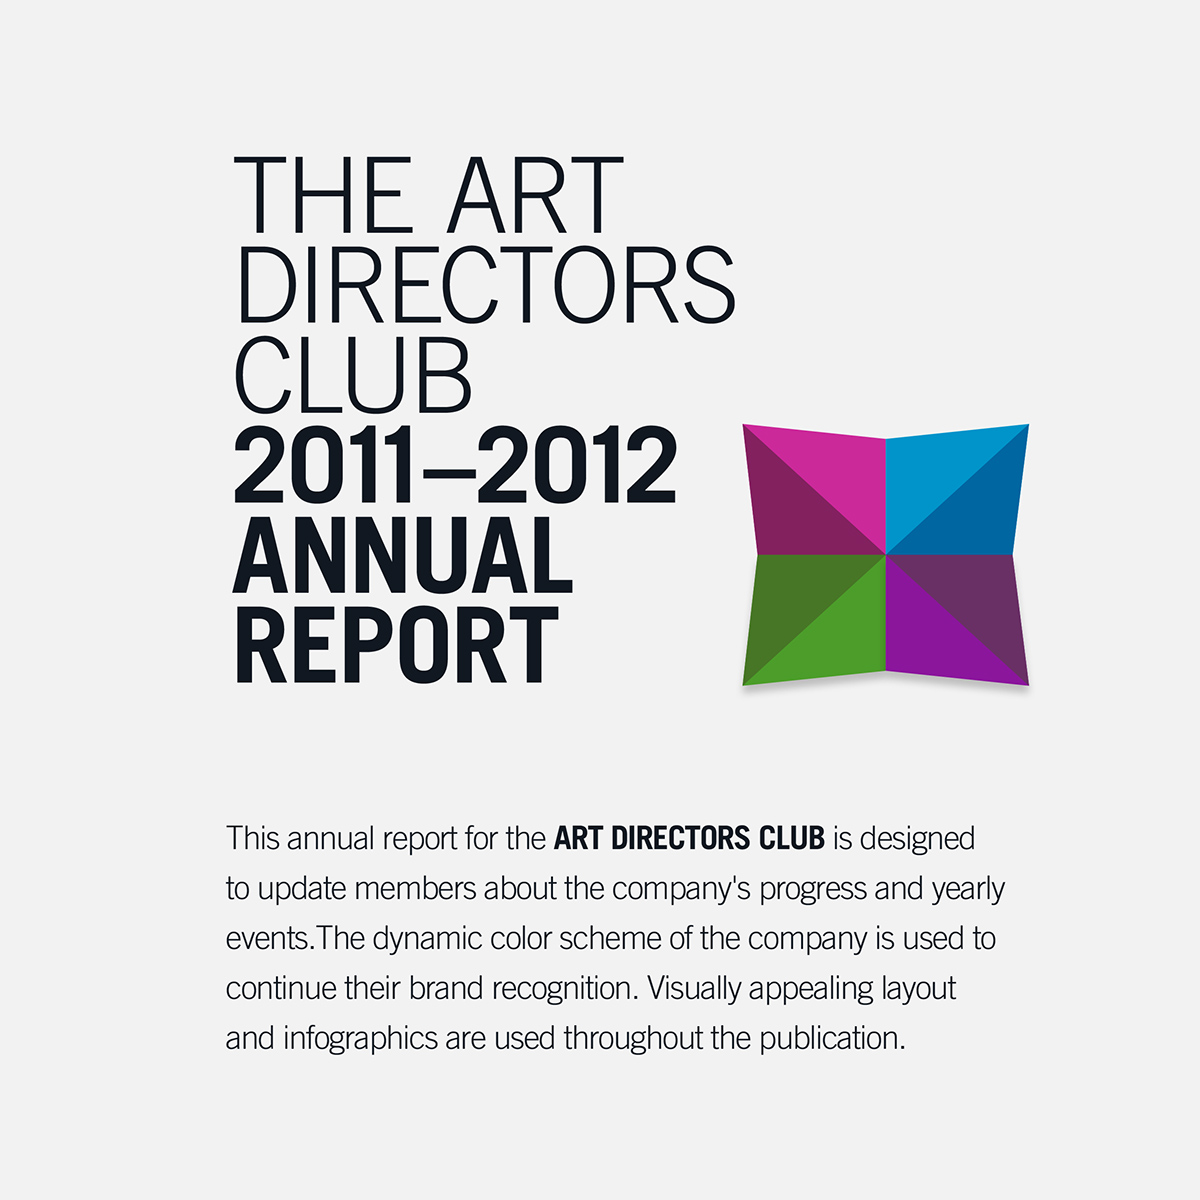 annual report Art Director publication publication design ANNUAL report print poster brochure Branding Identity editorial die cuts Diecut infographic